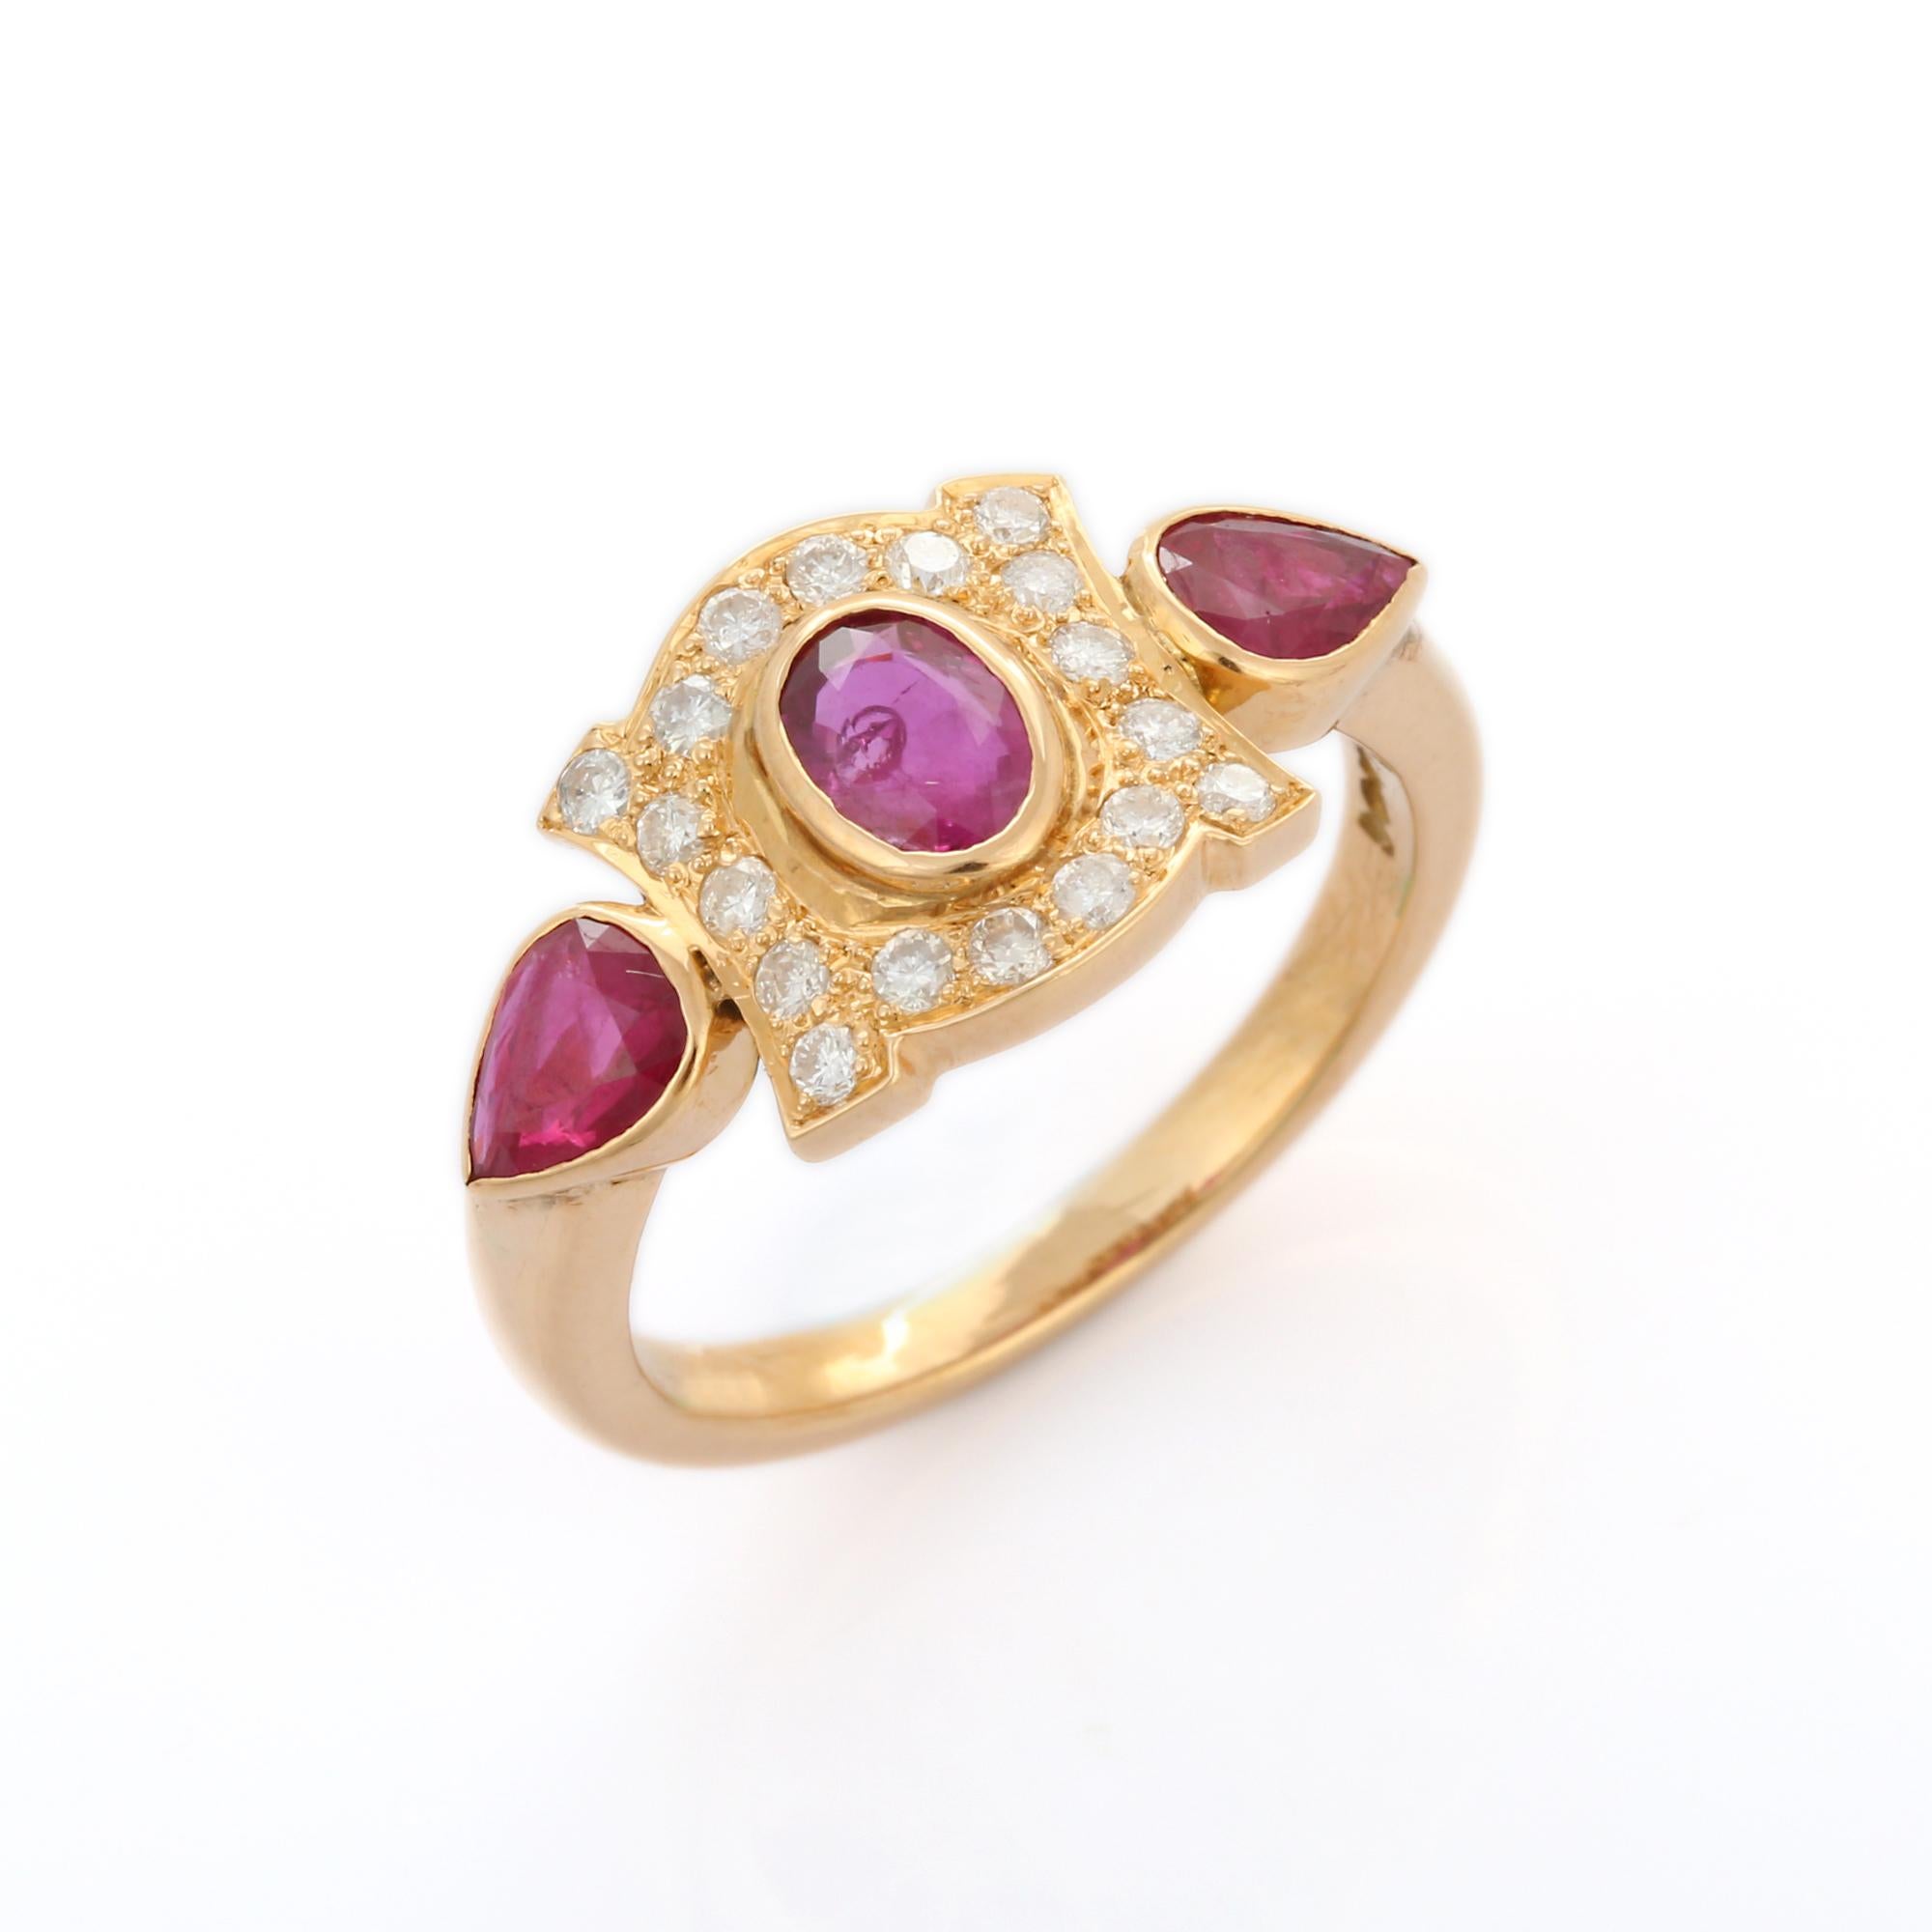 For Sale:  18K Yellow Gold Ruby Three Stone Ring with Diamonds Wedding Gemstone Ring 6